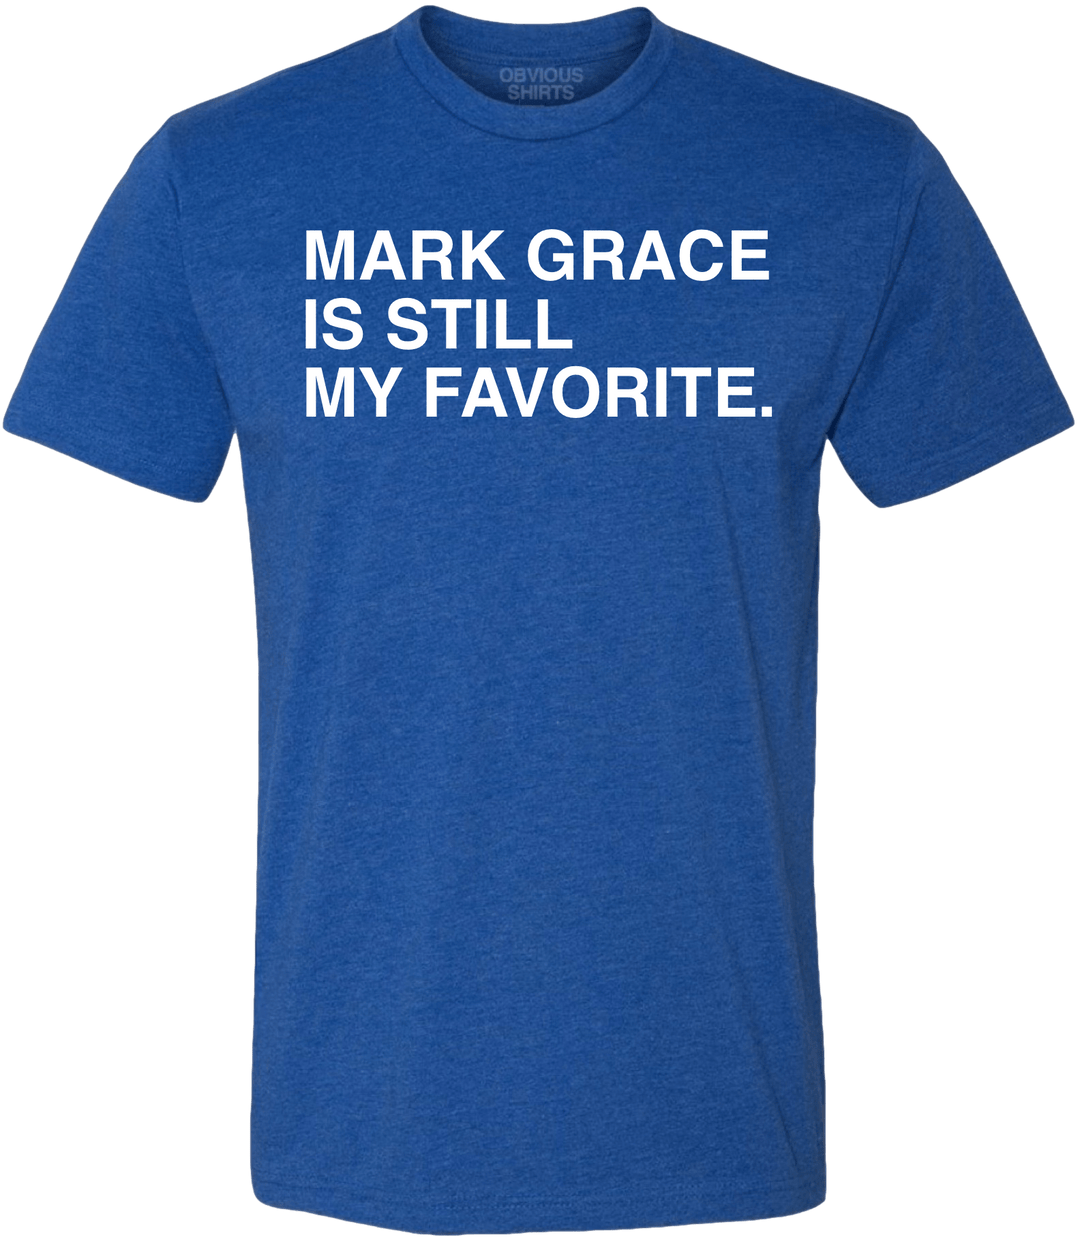 MARK GRACE IS STILL MY FAVORITE. - OBVIOUS SHIRTS